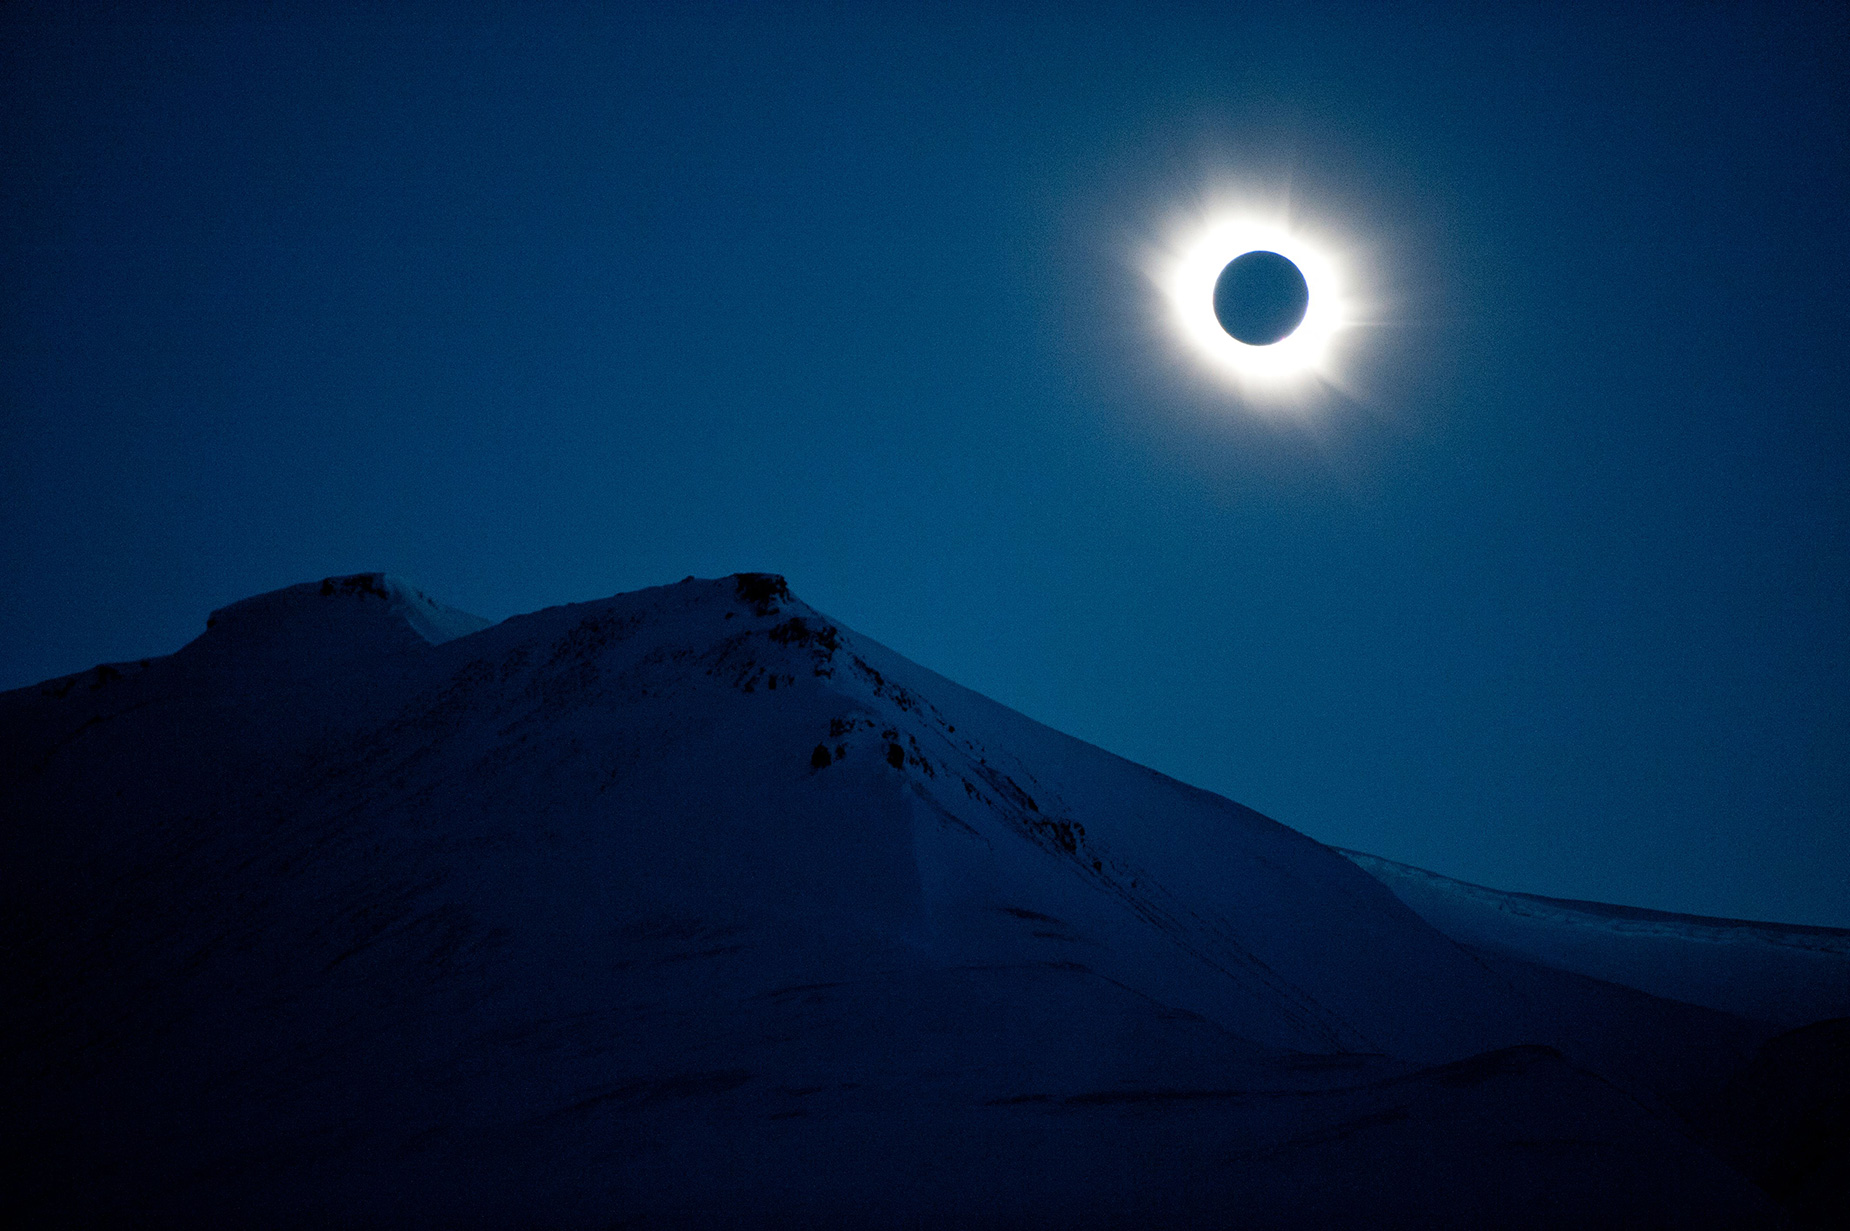 A total solar eclipse can be seen in Svalbard, Norway, on March 20, 2015.